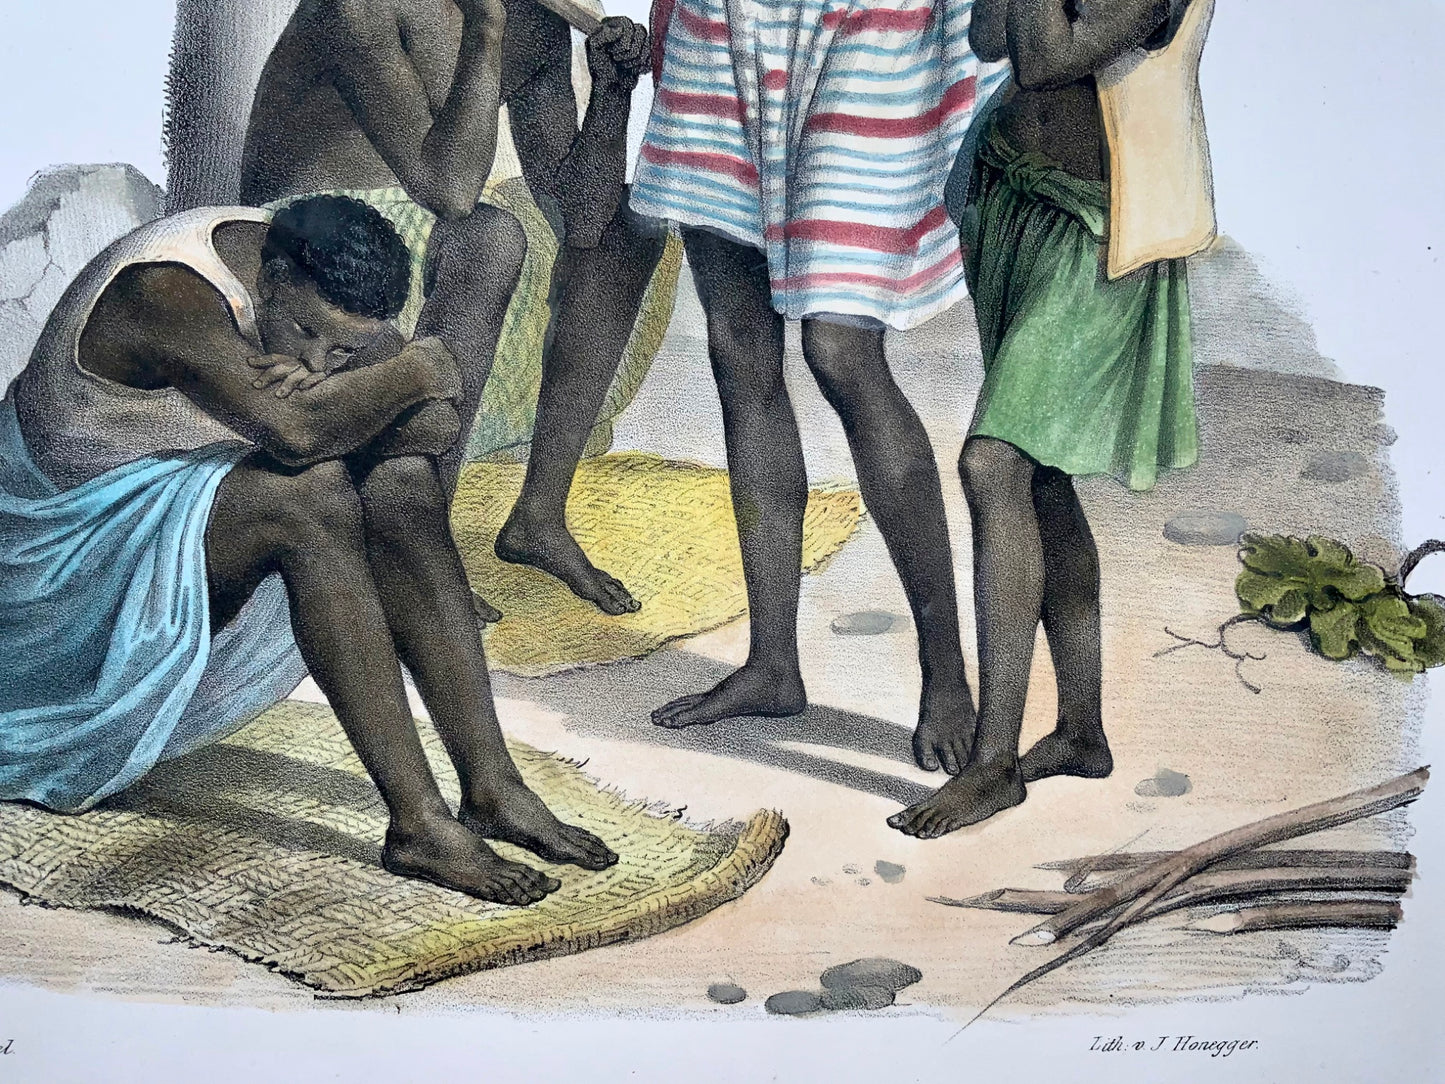 1840 Slavery, African Slaves, after Fuchs, hand coloured folio stone lithograph, ethnology